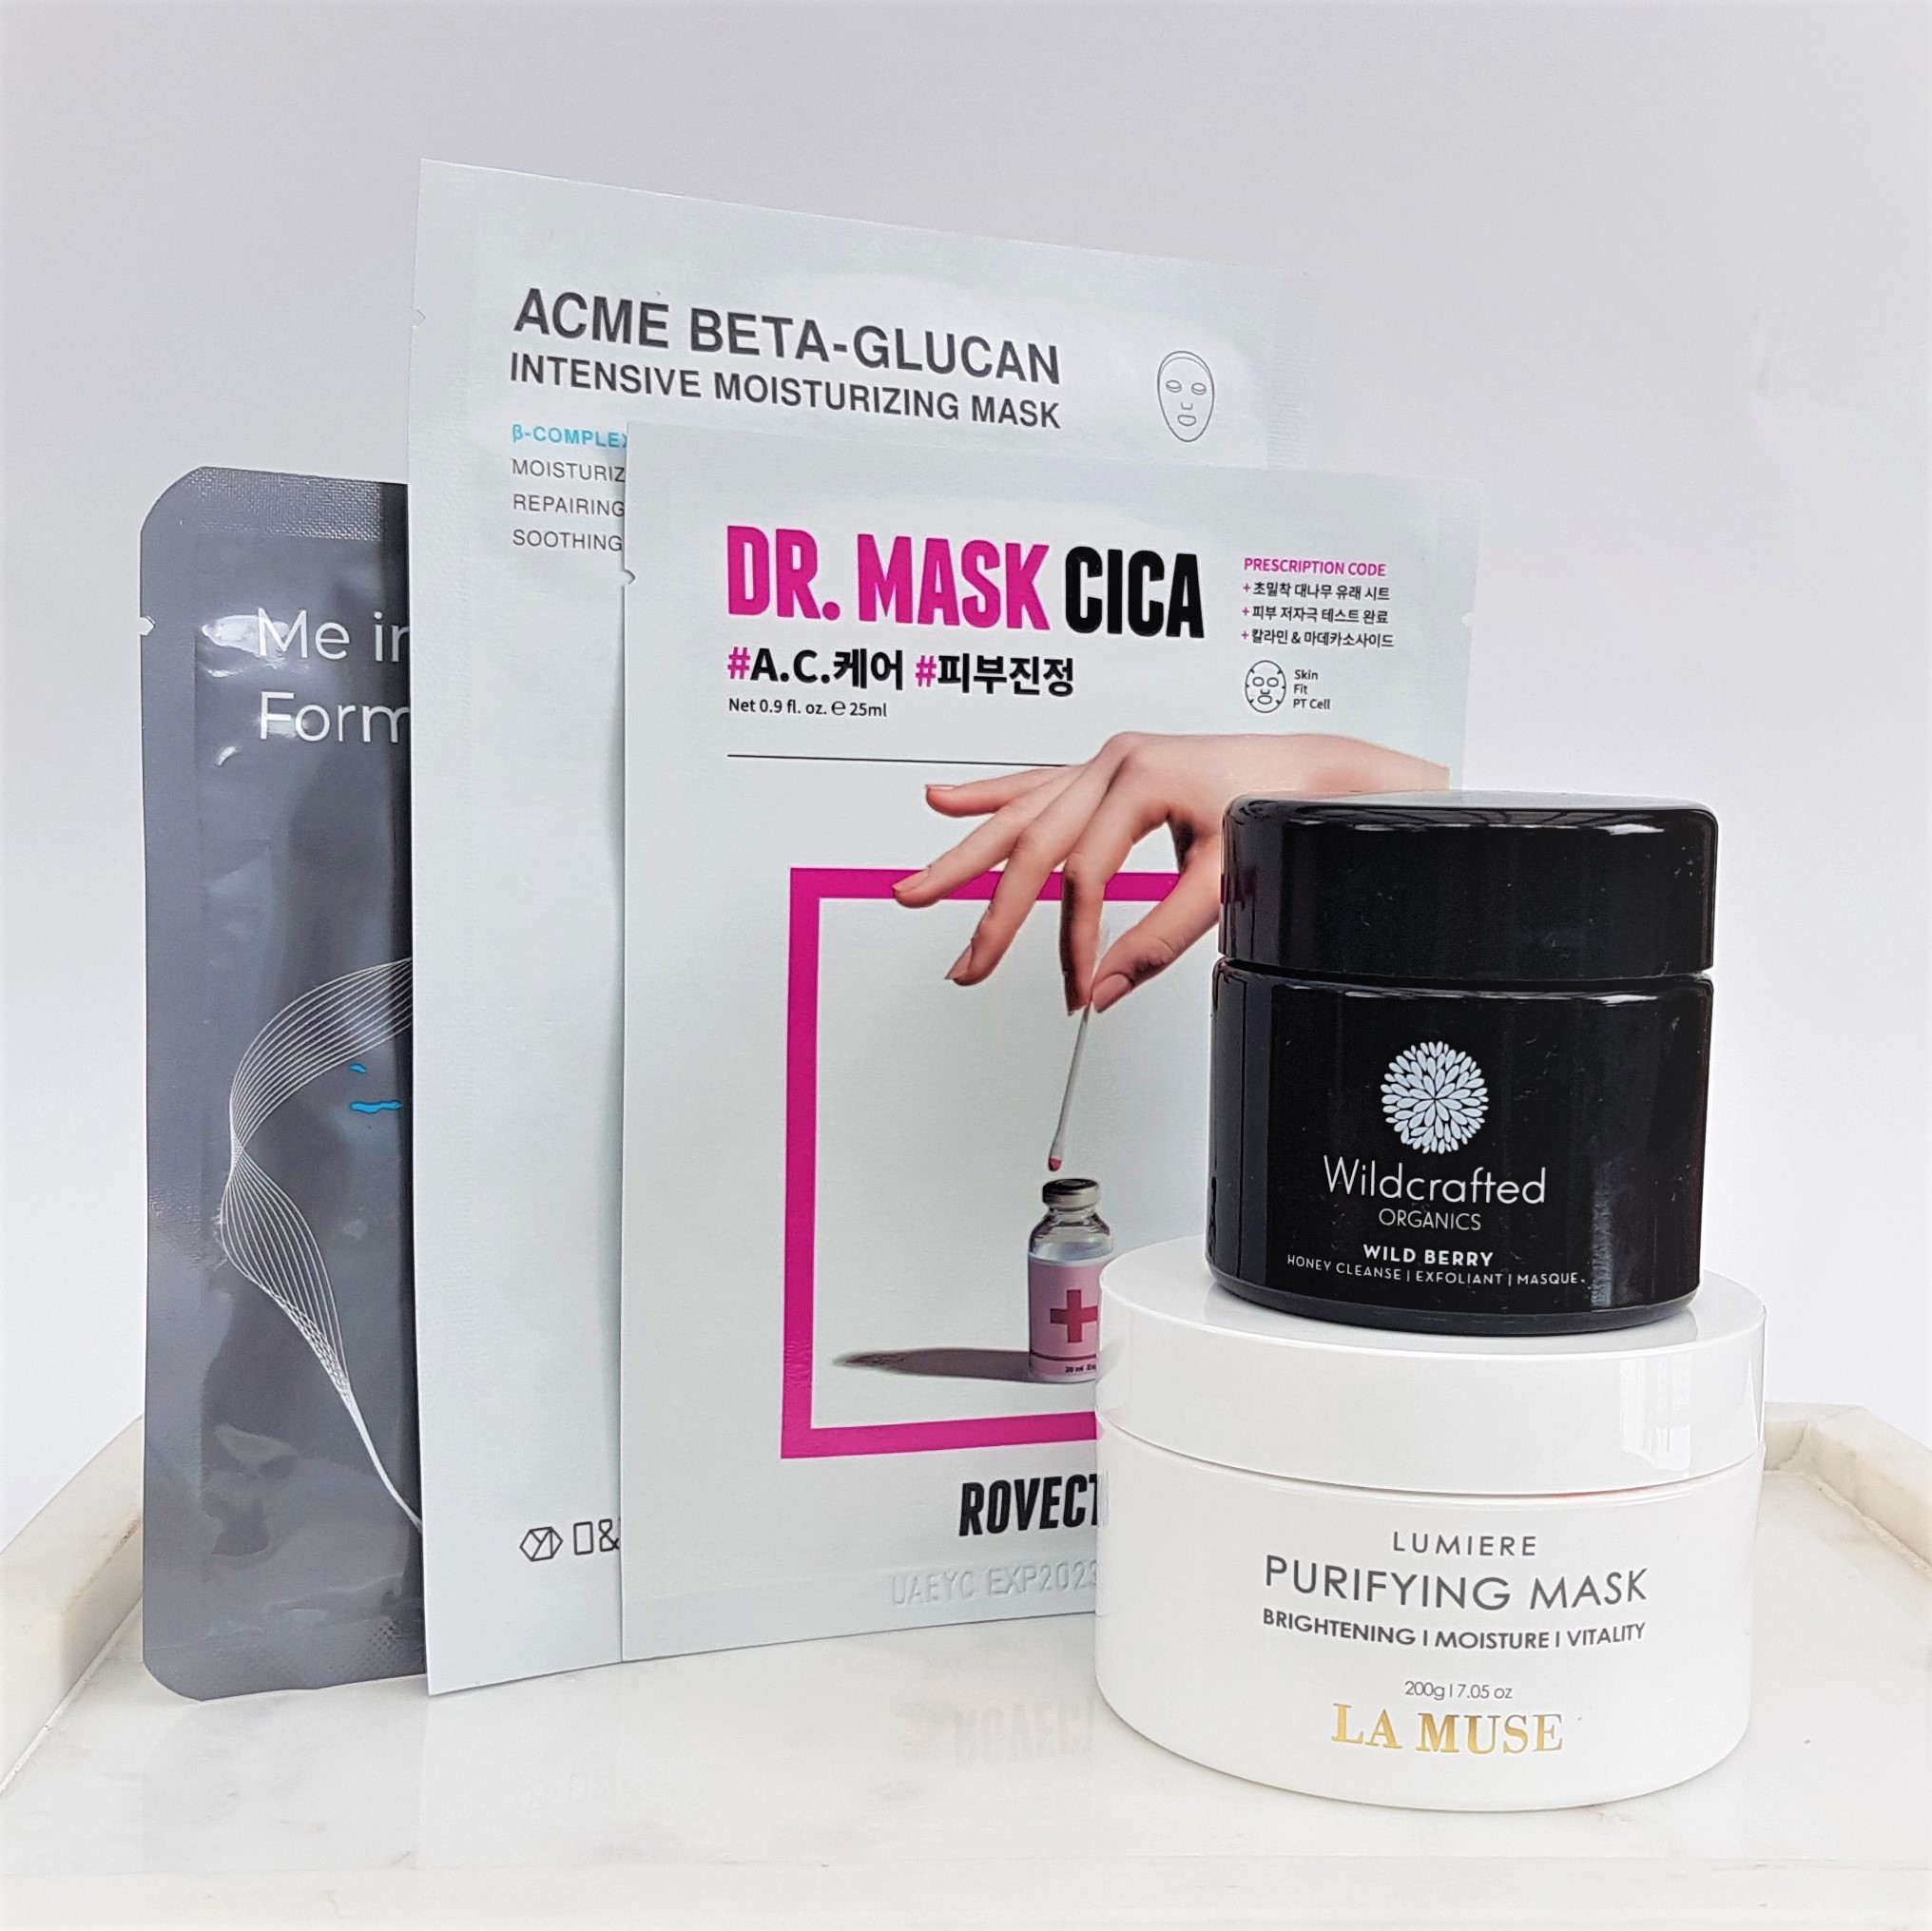 Pamper yourself by multi-masking